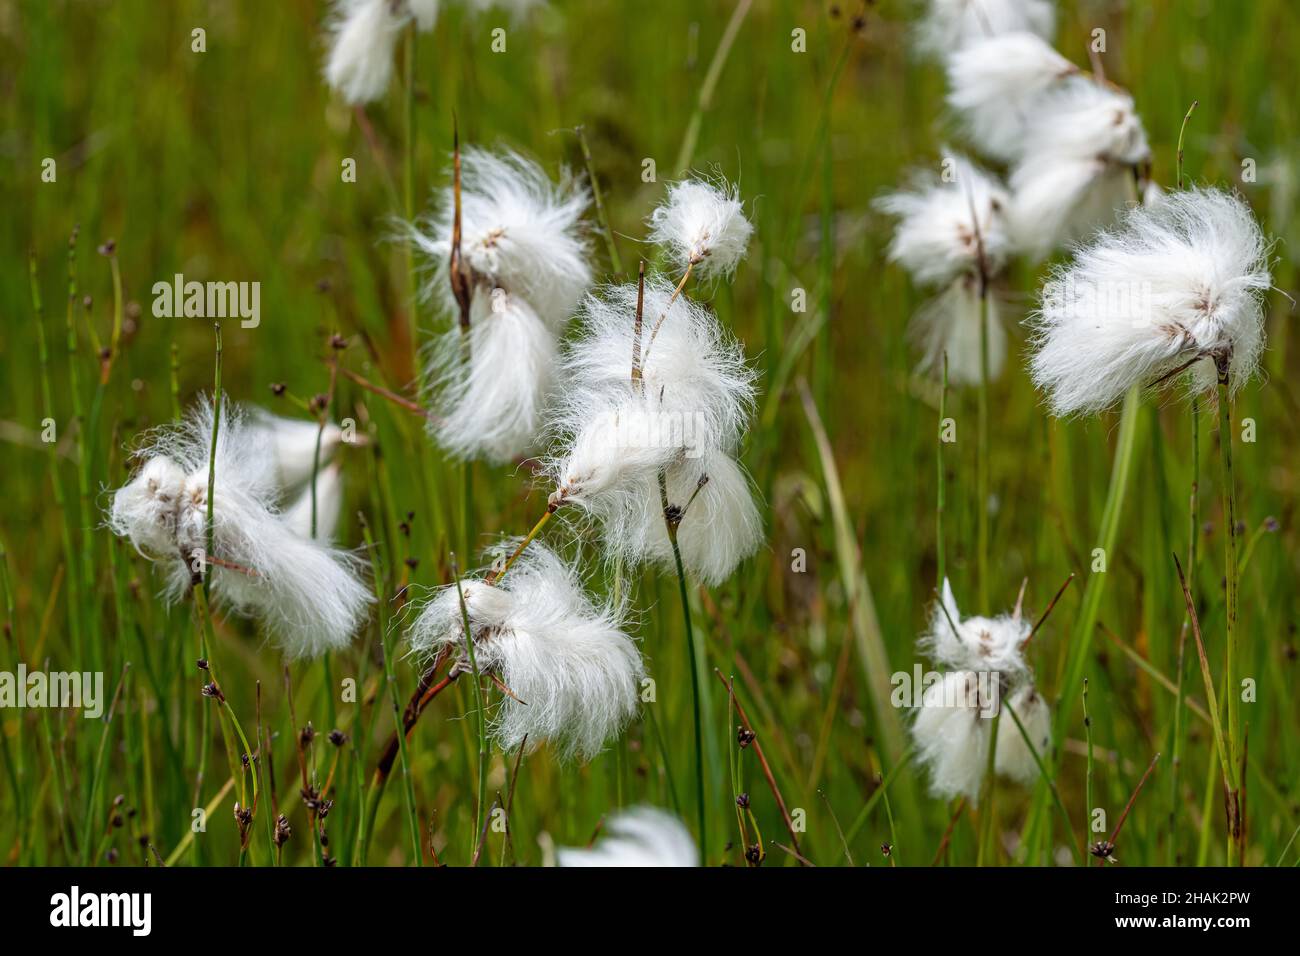 Small white wad on simple green stem. Eriophorum vaginatum in green vegetation. Tussock cottongrass, or sheathed cottonsedge looks like clot of dust. Stock Photo